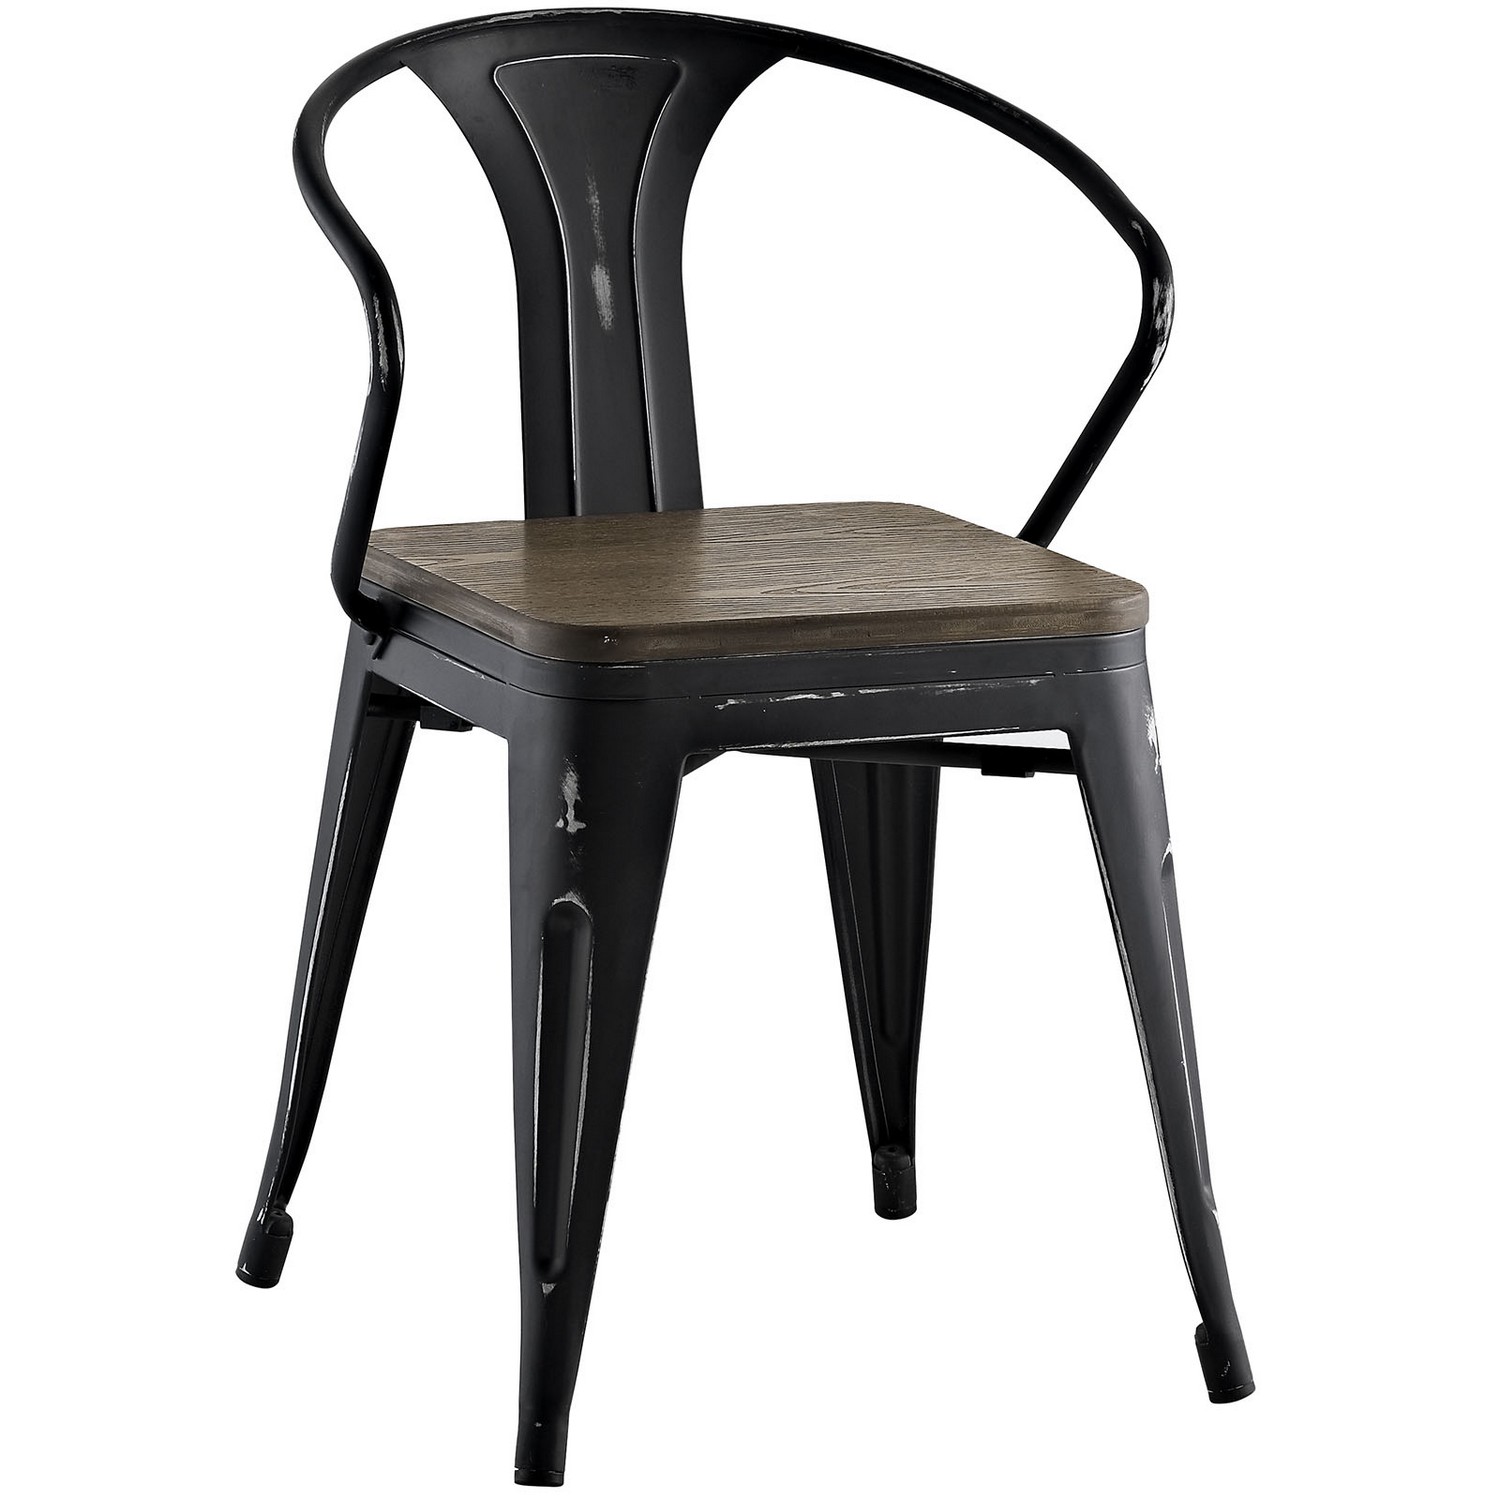 Modway Promenade Dining Chair with Bamboo Seat - Black